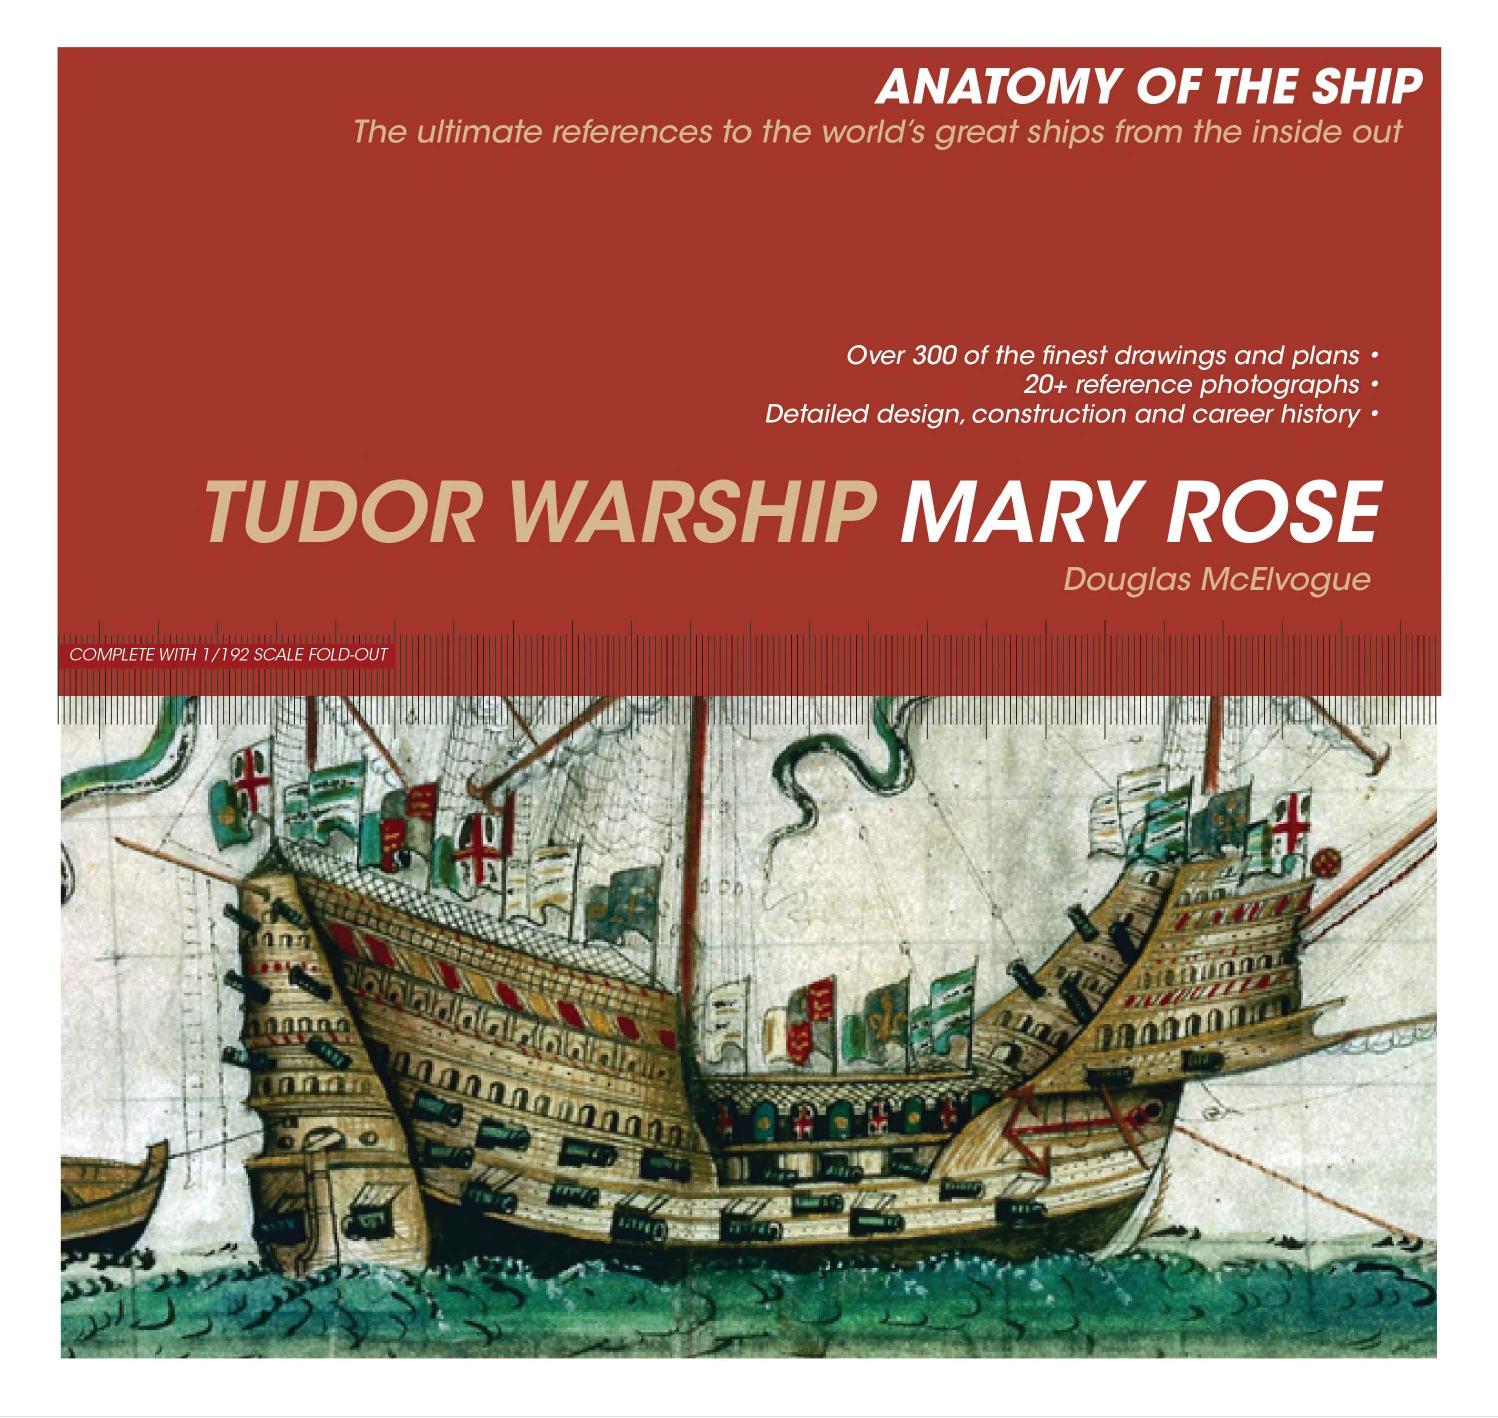 Tudor Warship Mary Rose by Unknown